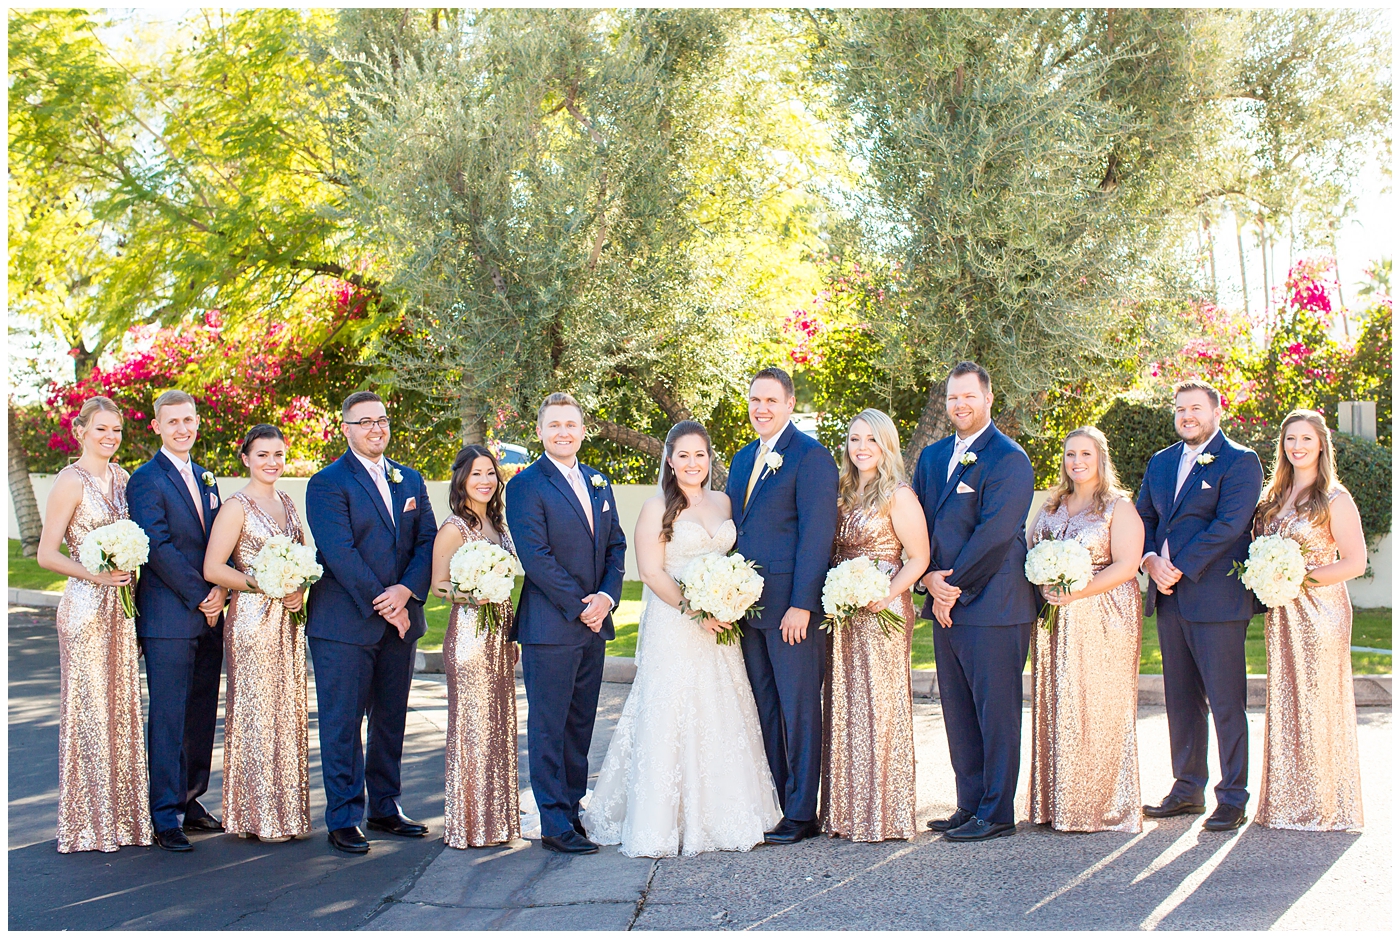 bride in lillian lottie couture wedding dress with white rose bouquet and groom in navy blue suit from men's warehouse with wedding party